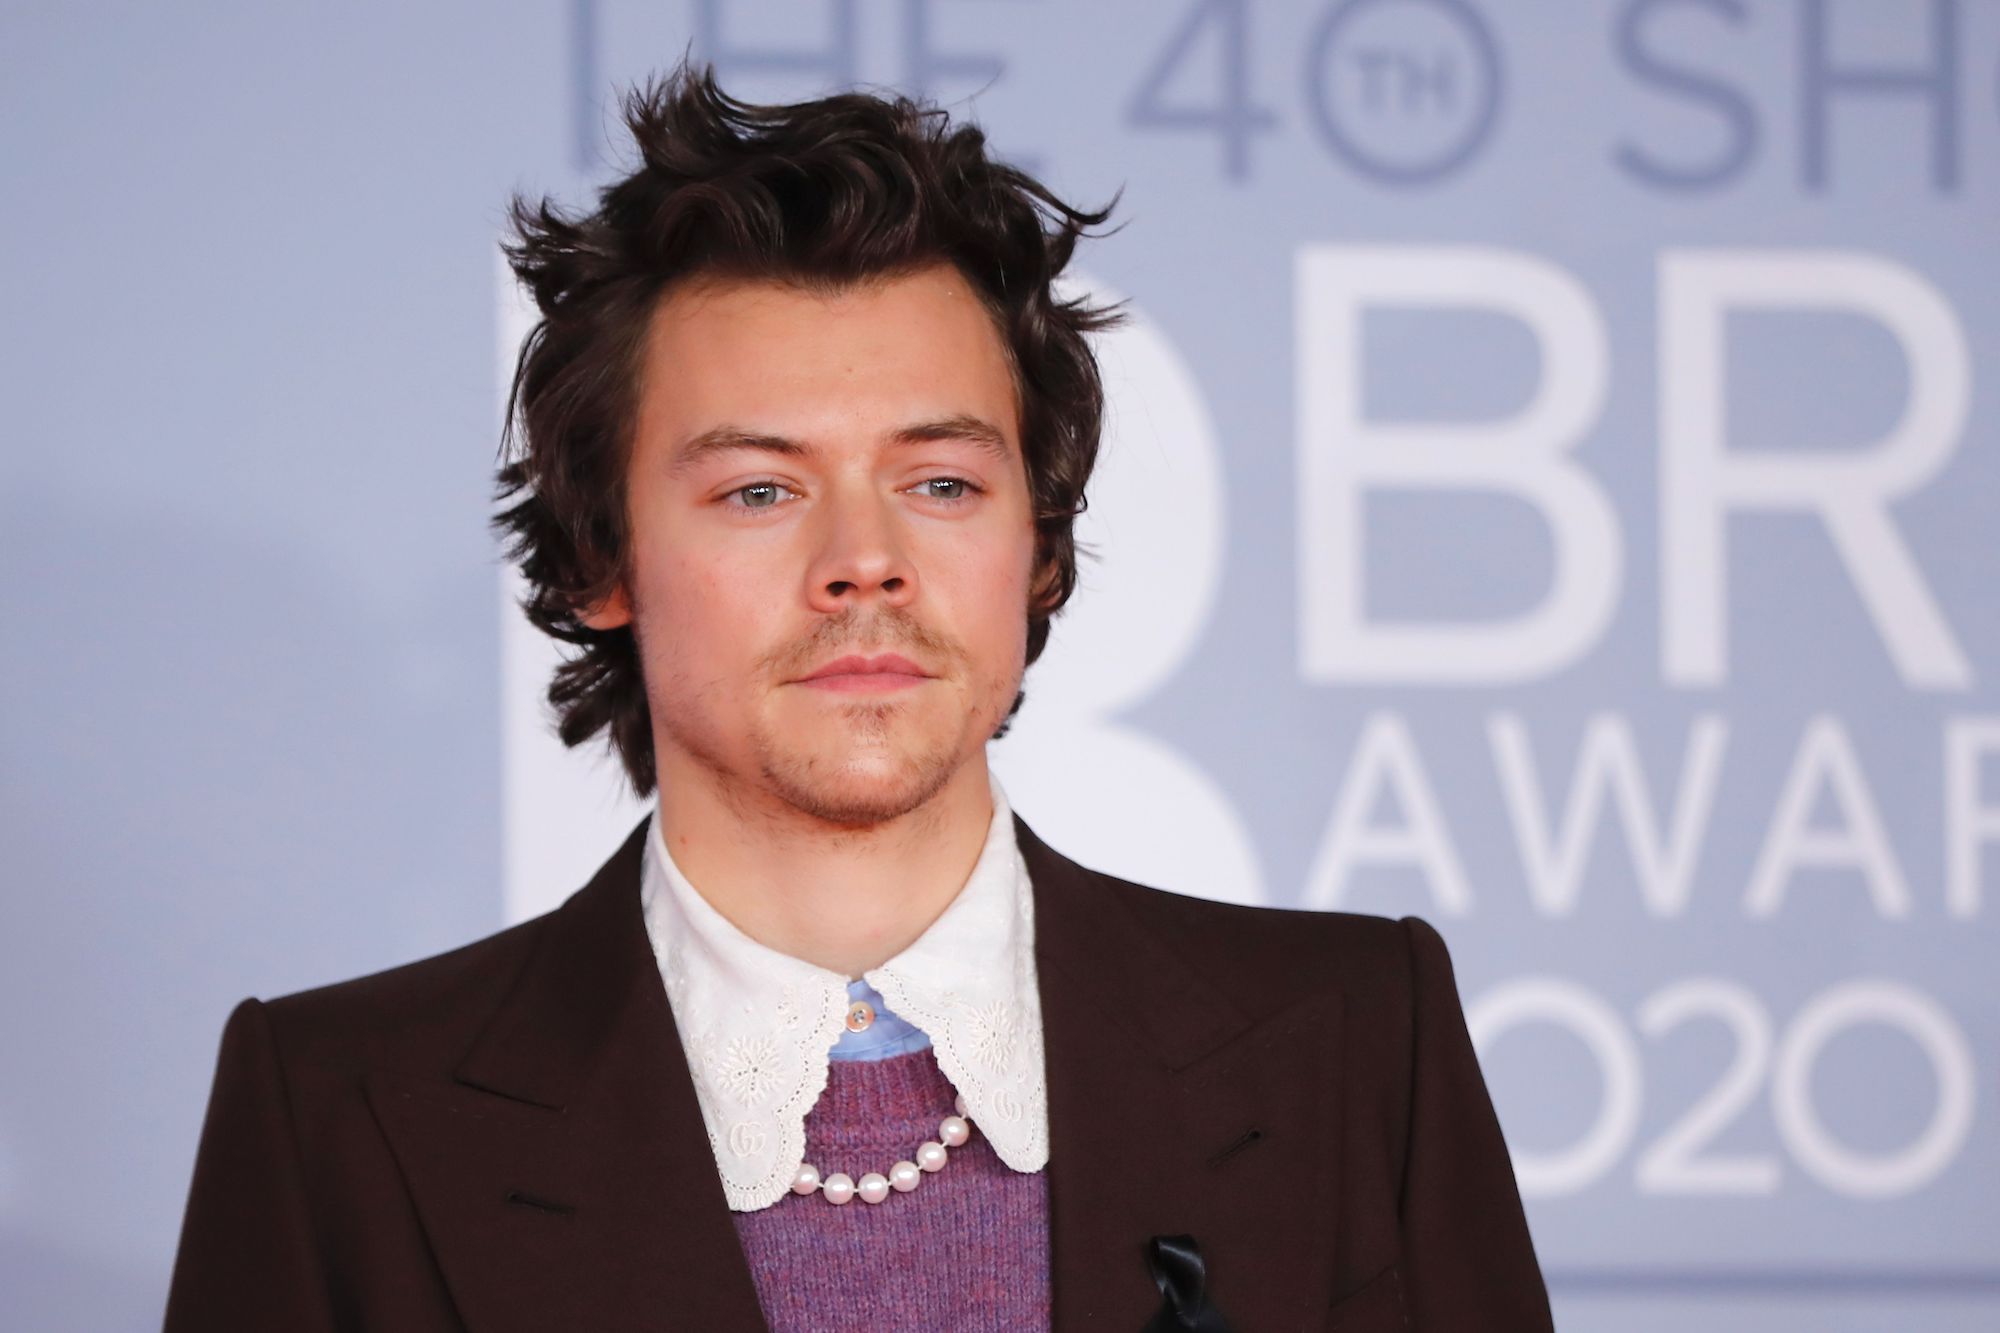 Harry Styles on the red carpet at the BRIT Awards 2020 in London on Feb. 18, 2020.